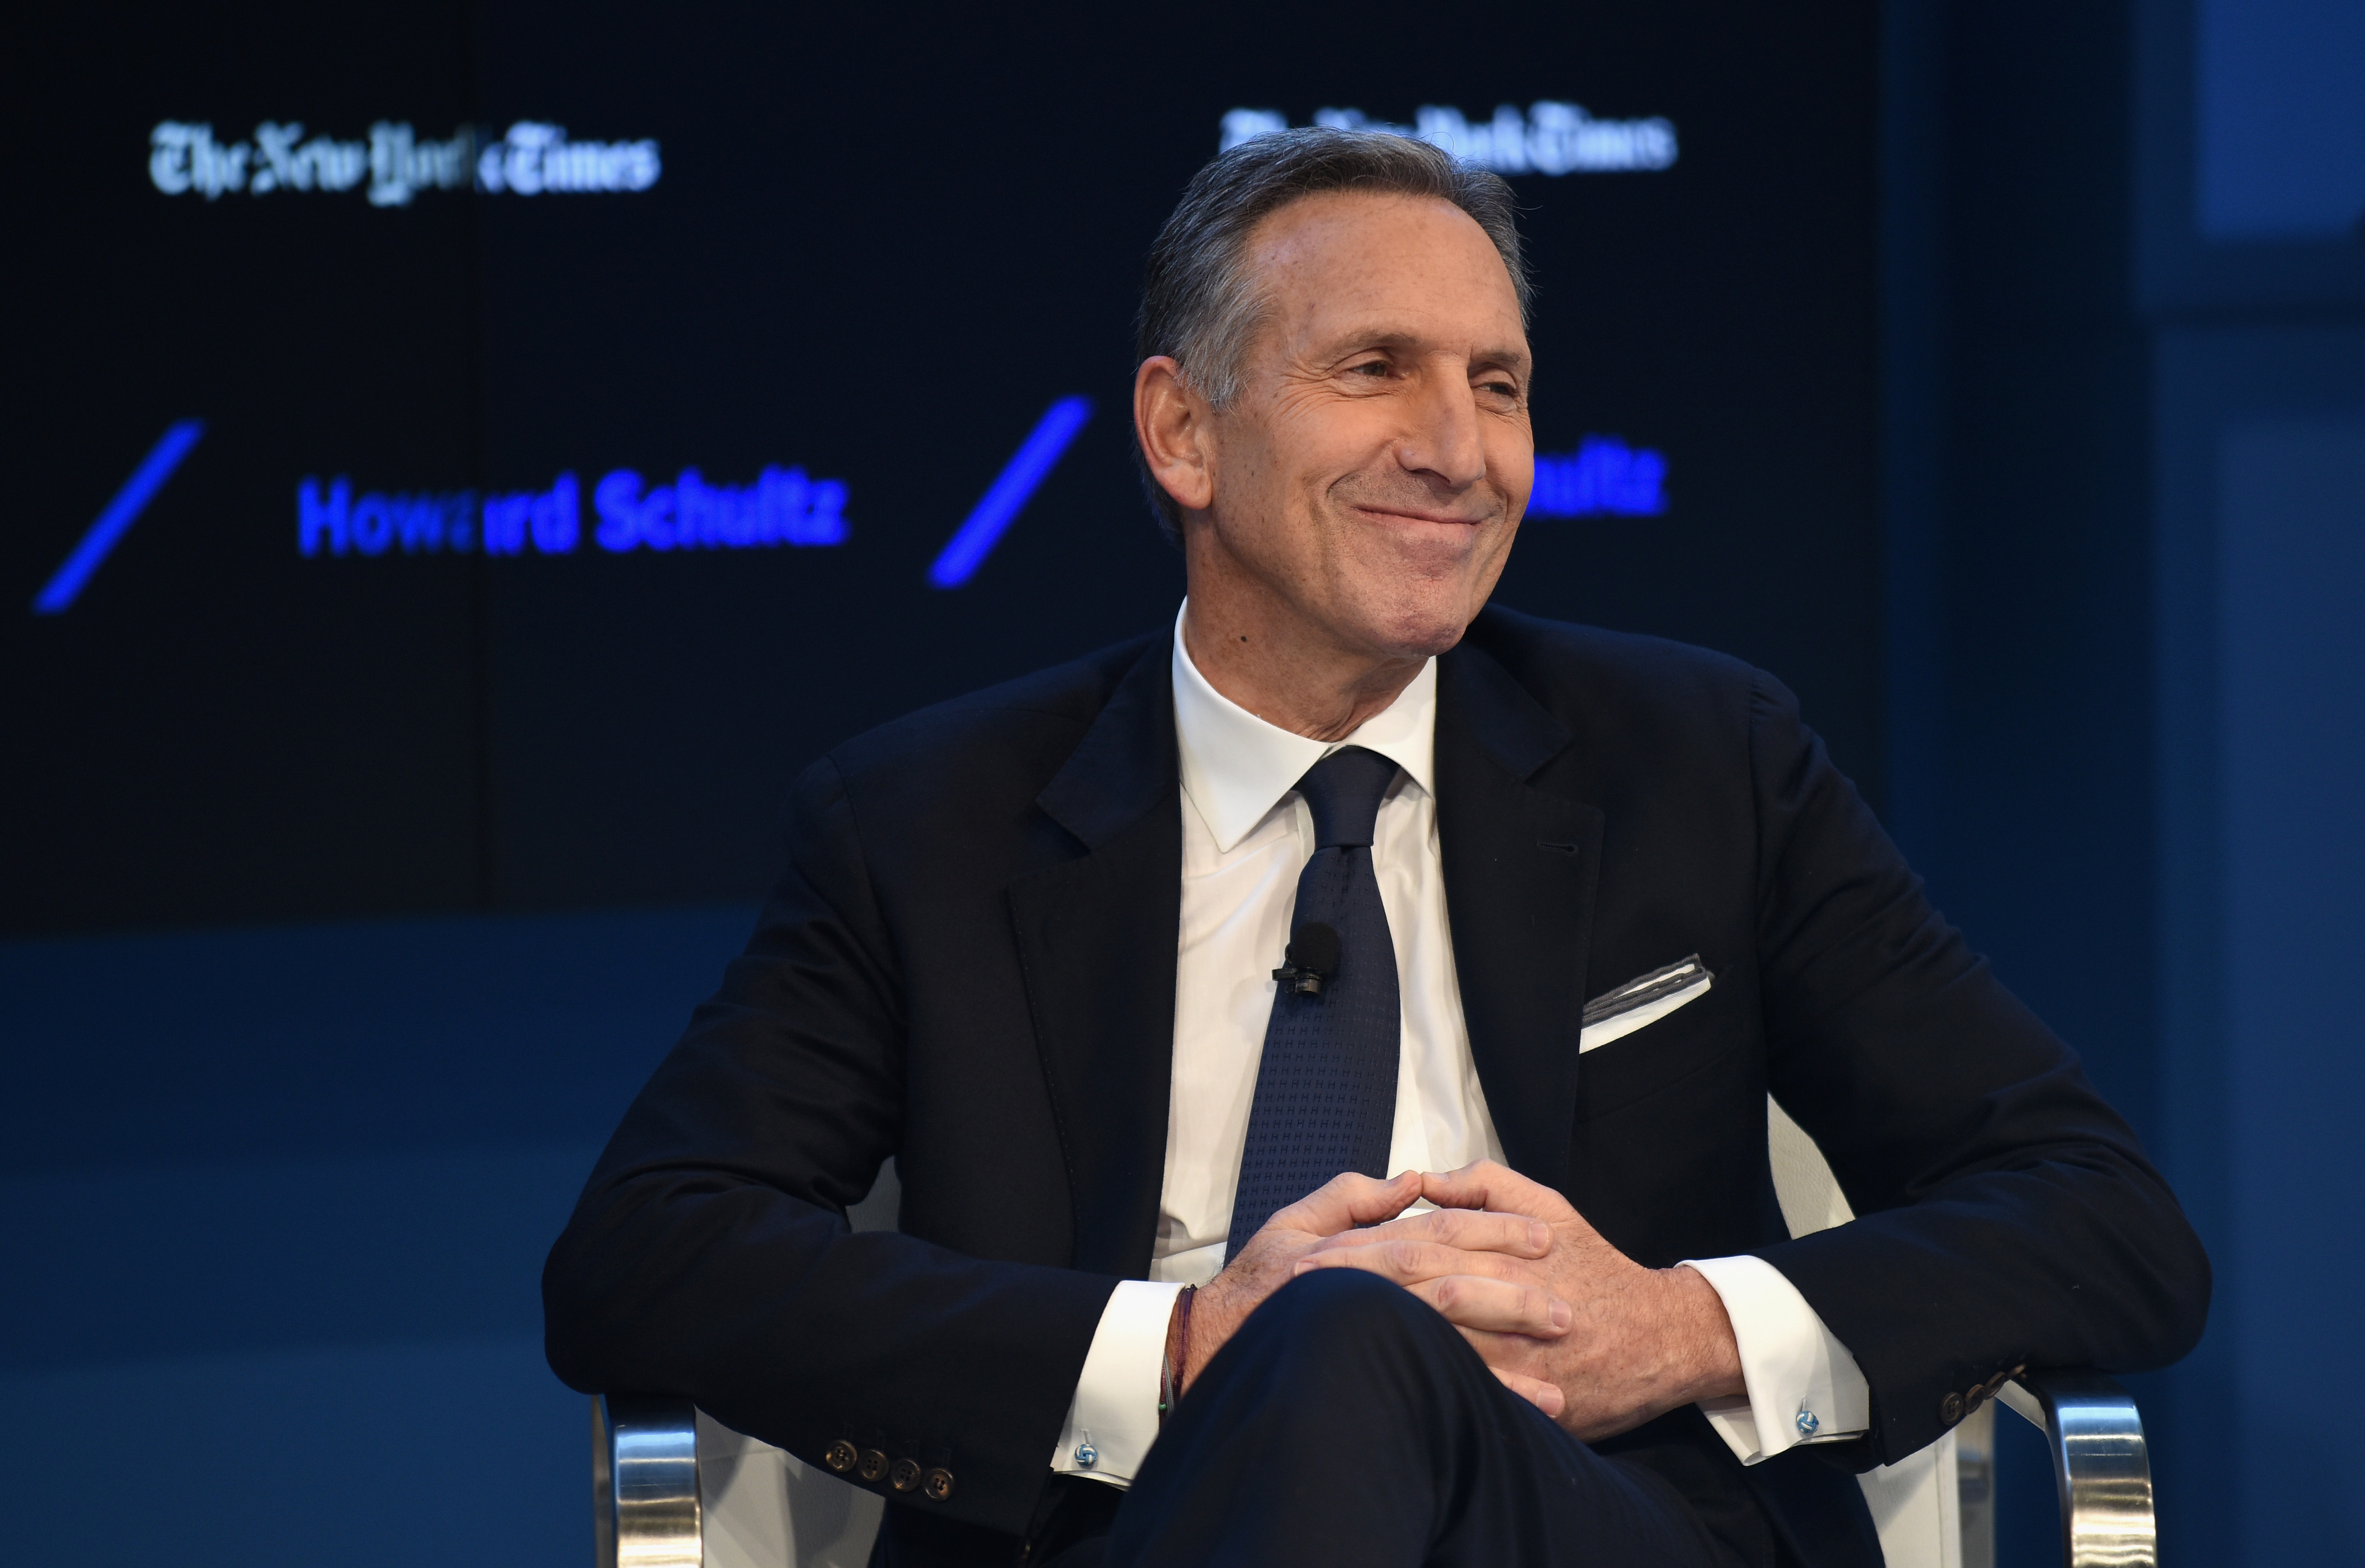 NEW YORK, NY - NOVEMBER 10: Chairman and CEO of Starbucks Howard Schultz speak at The New York Times DealBook Conference at Jazz at Lincoln Center on November 10, 2016 in New York City.   Bryan Bedder/Getty Images for The New York Times /AFP